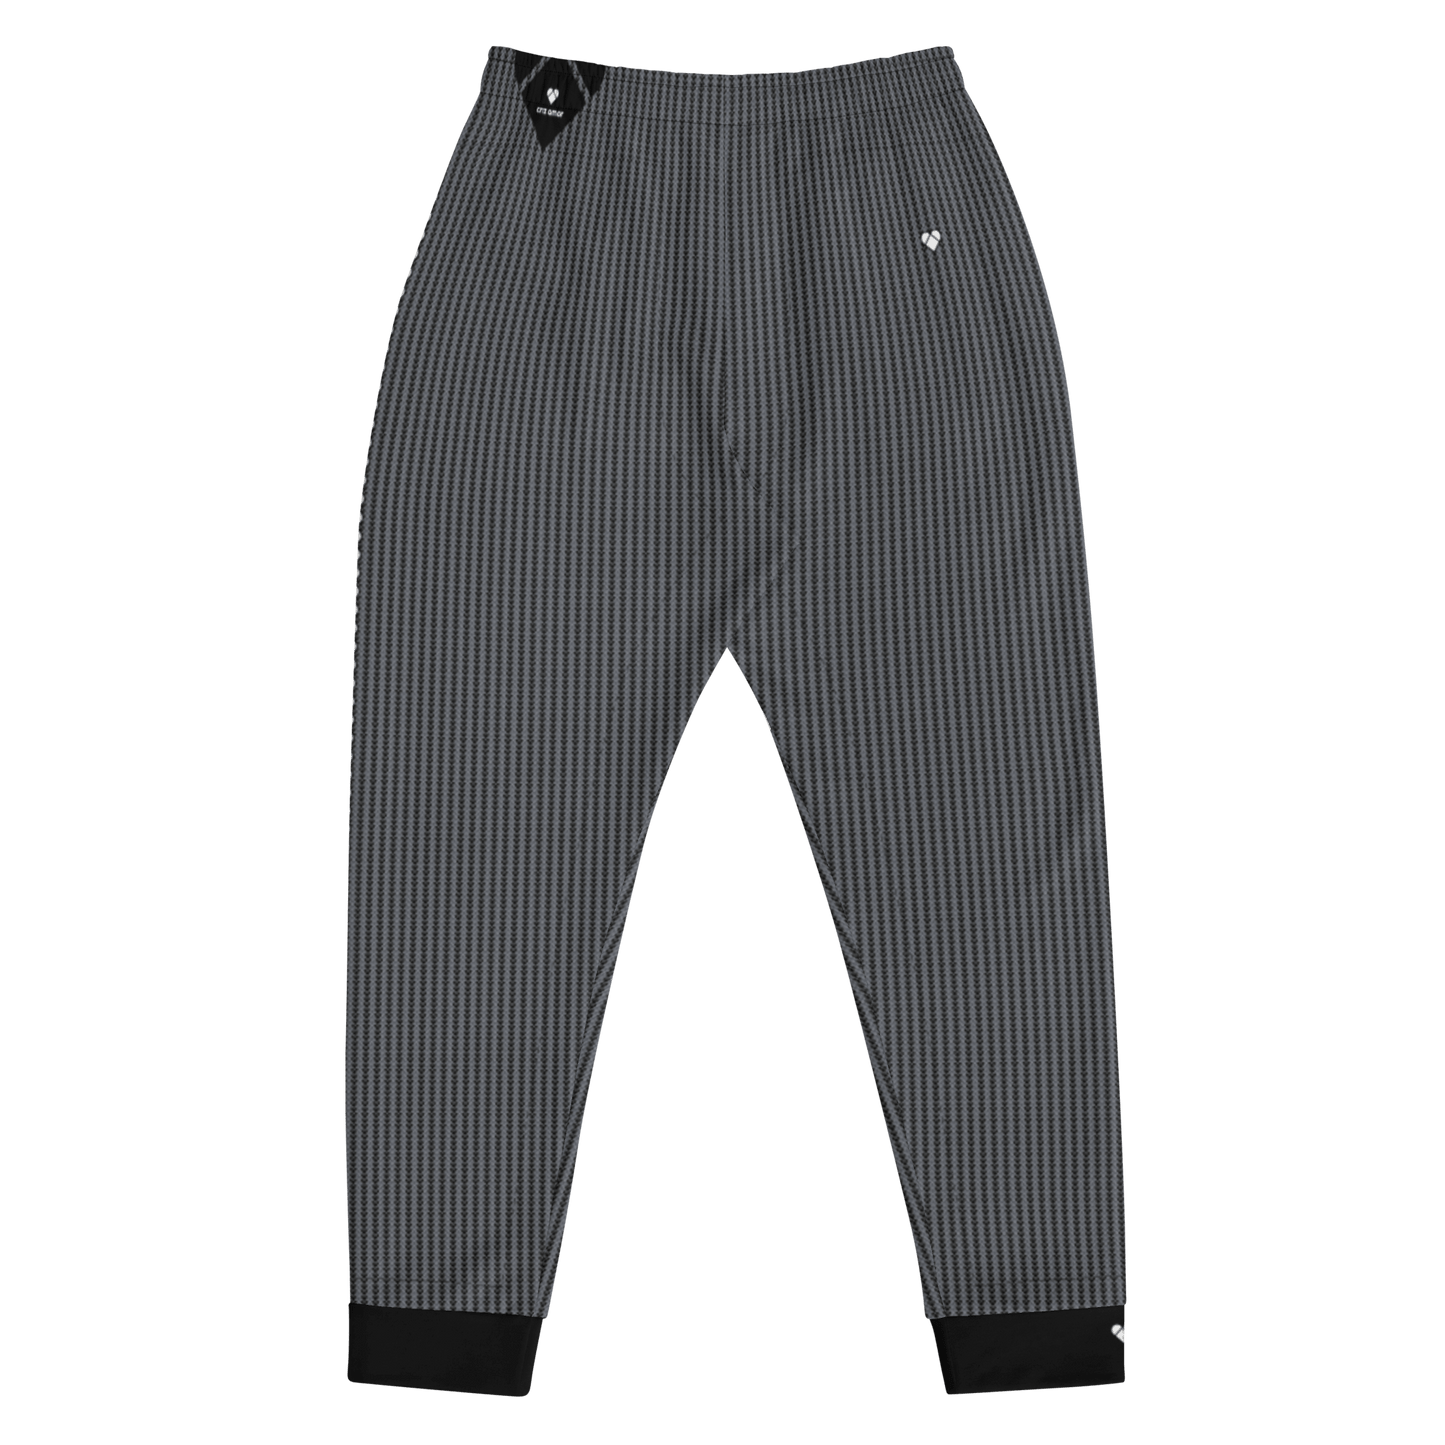 Black Joggers for Men with heart-shaped geometrical pattern from CRiZ AMOR's Amor Primero Collection, product photo back